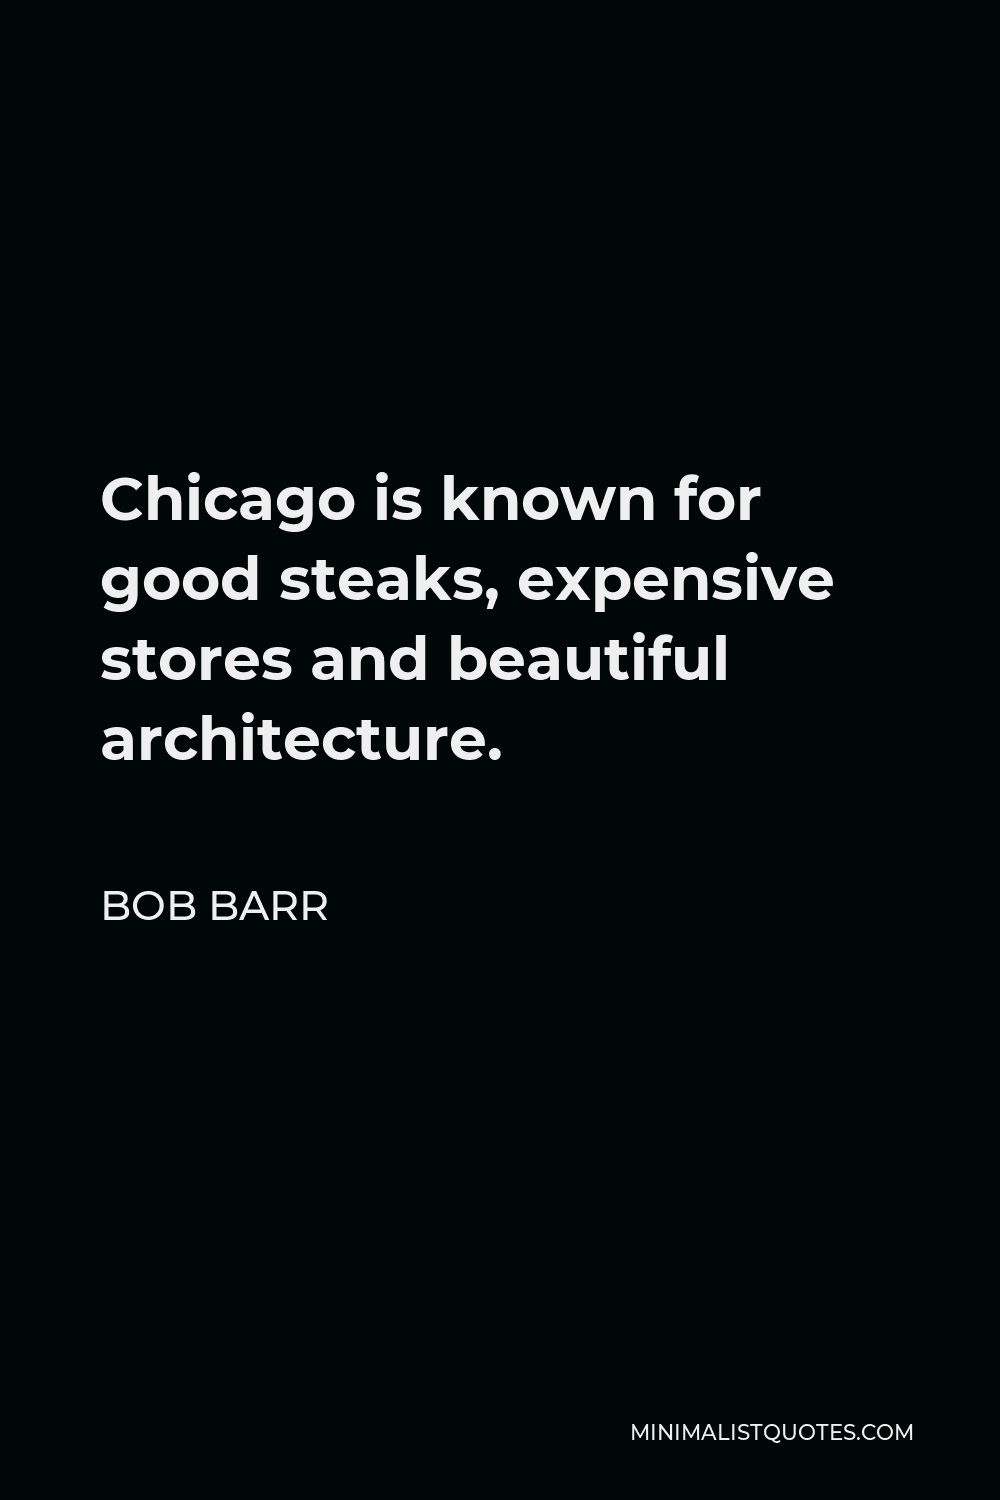 Bob Barr Quote - Chicago is known for good steaks, expensive stores and beautiful architecture.